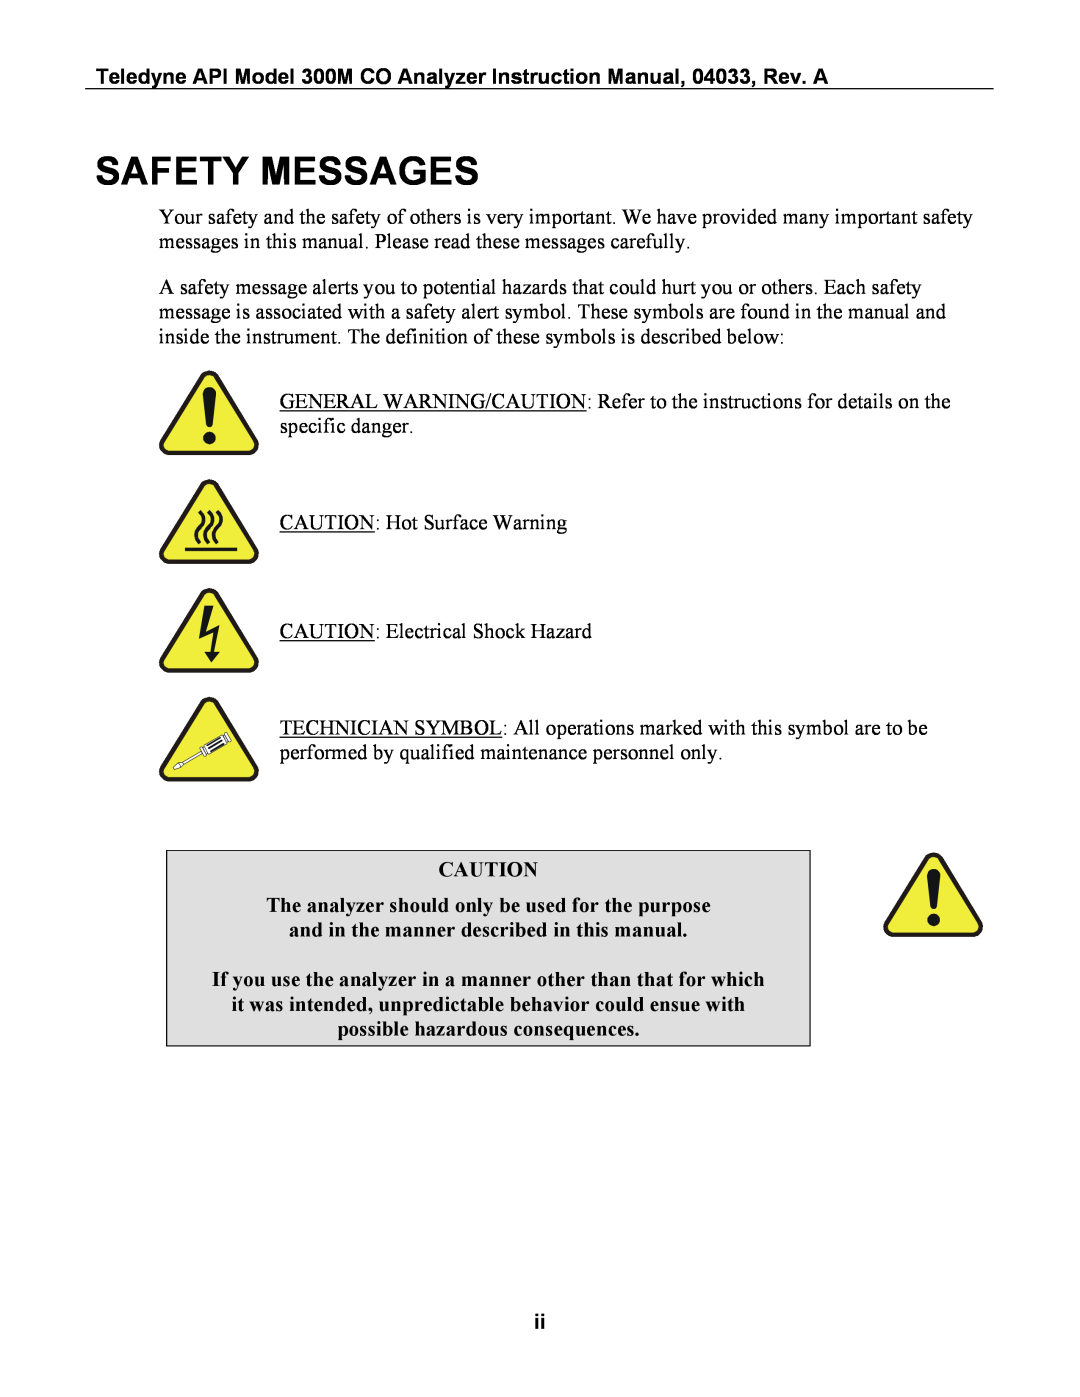 Teledyne 300M instruction manual Safety Messages, The analyzer should only be used for the purpose 